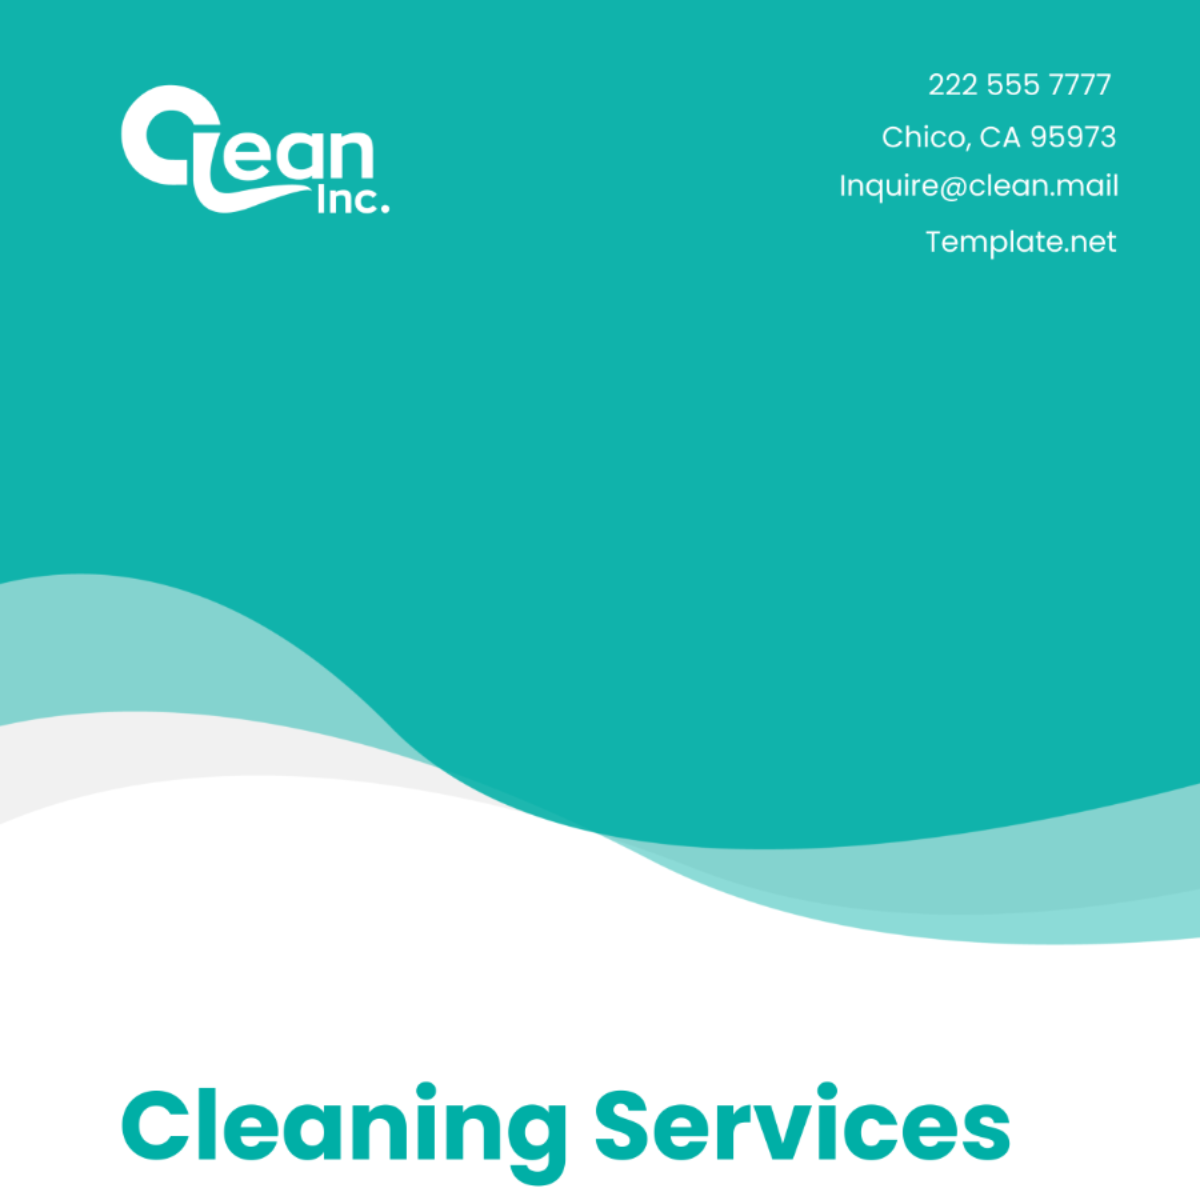 Free Cleaning Services Leadership Team Building Activity Plan Template